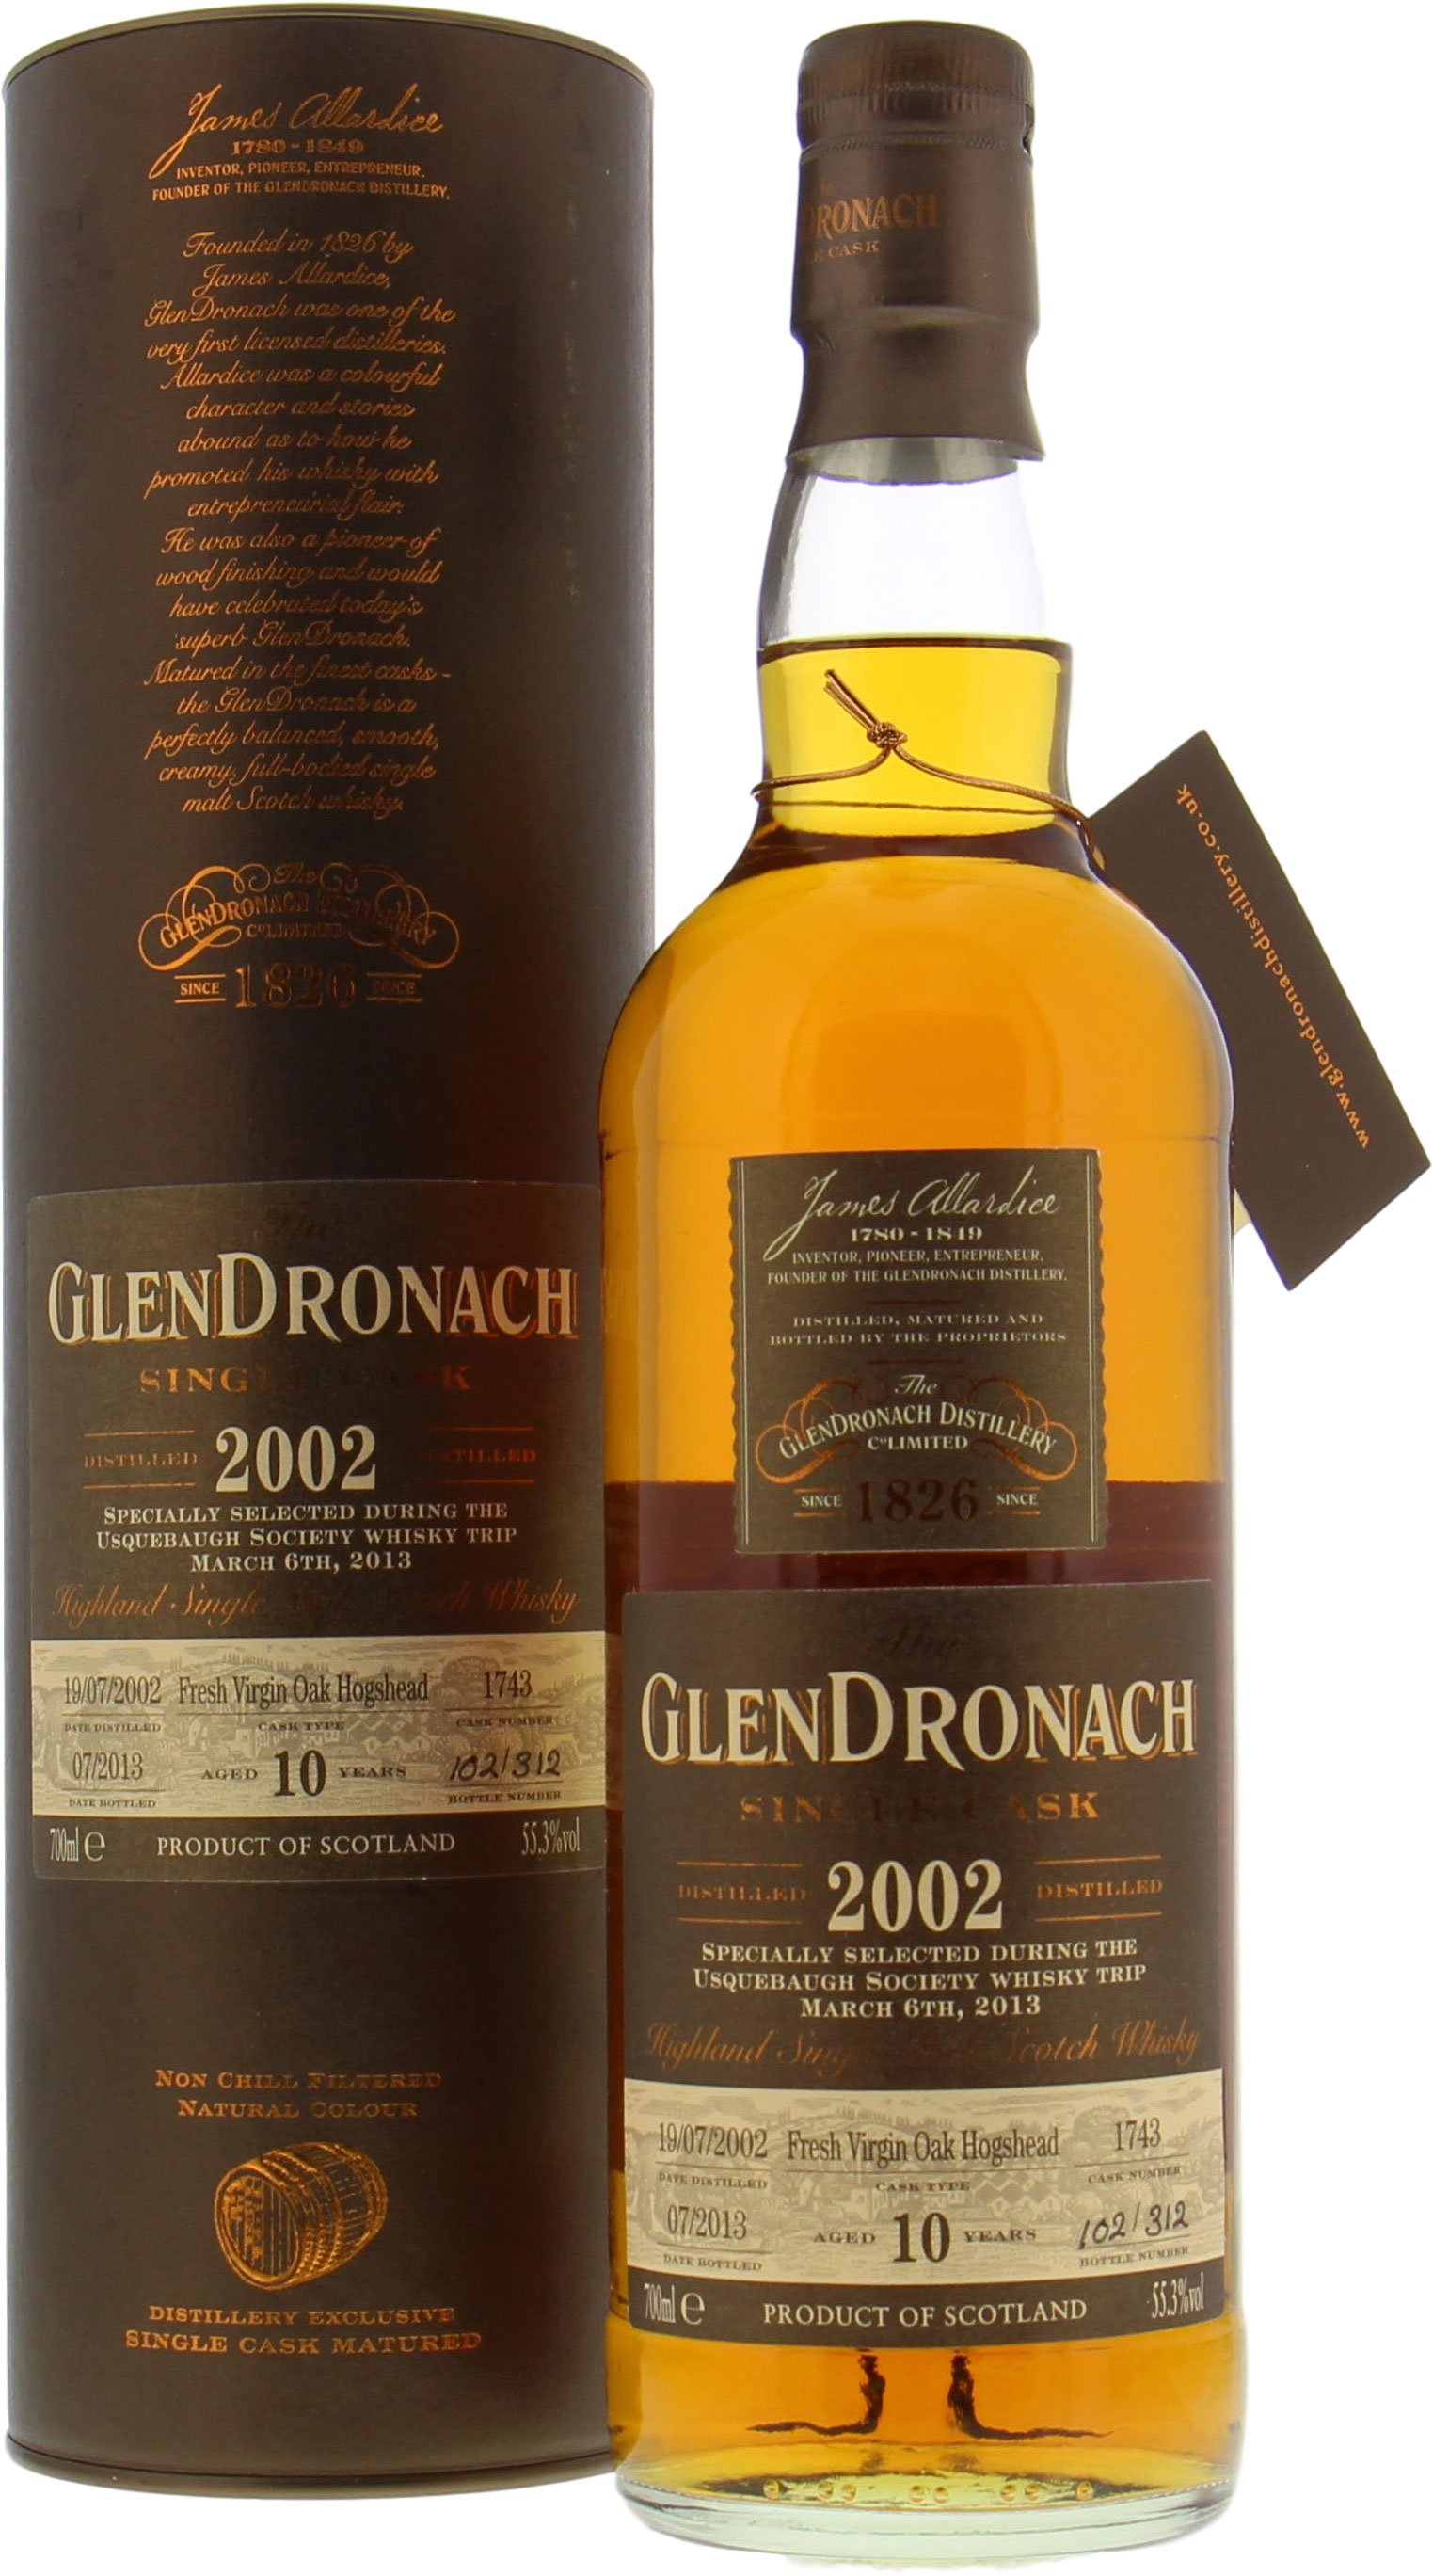 Glendronach - 10 Years Old Cask 1743 Bottled For Usquebaugh Society 55.3% 2002 In Original Container